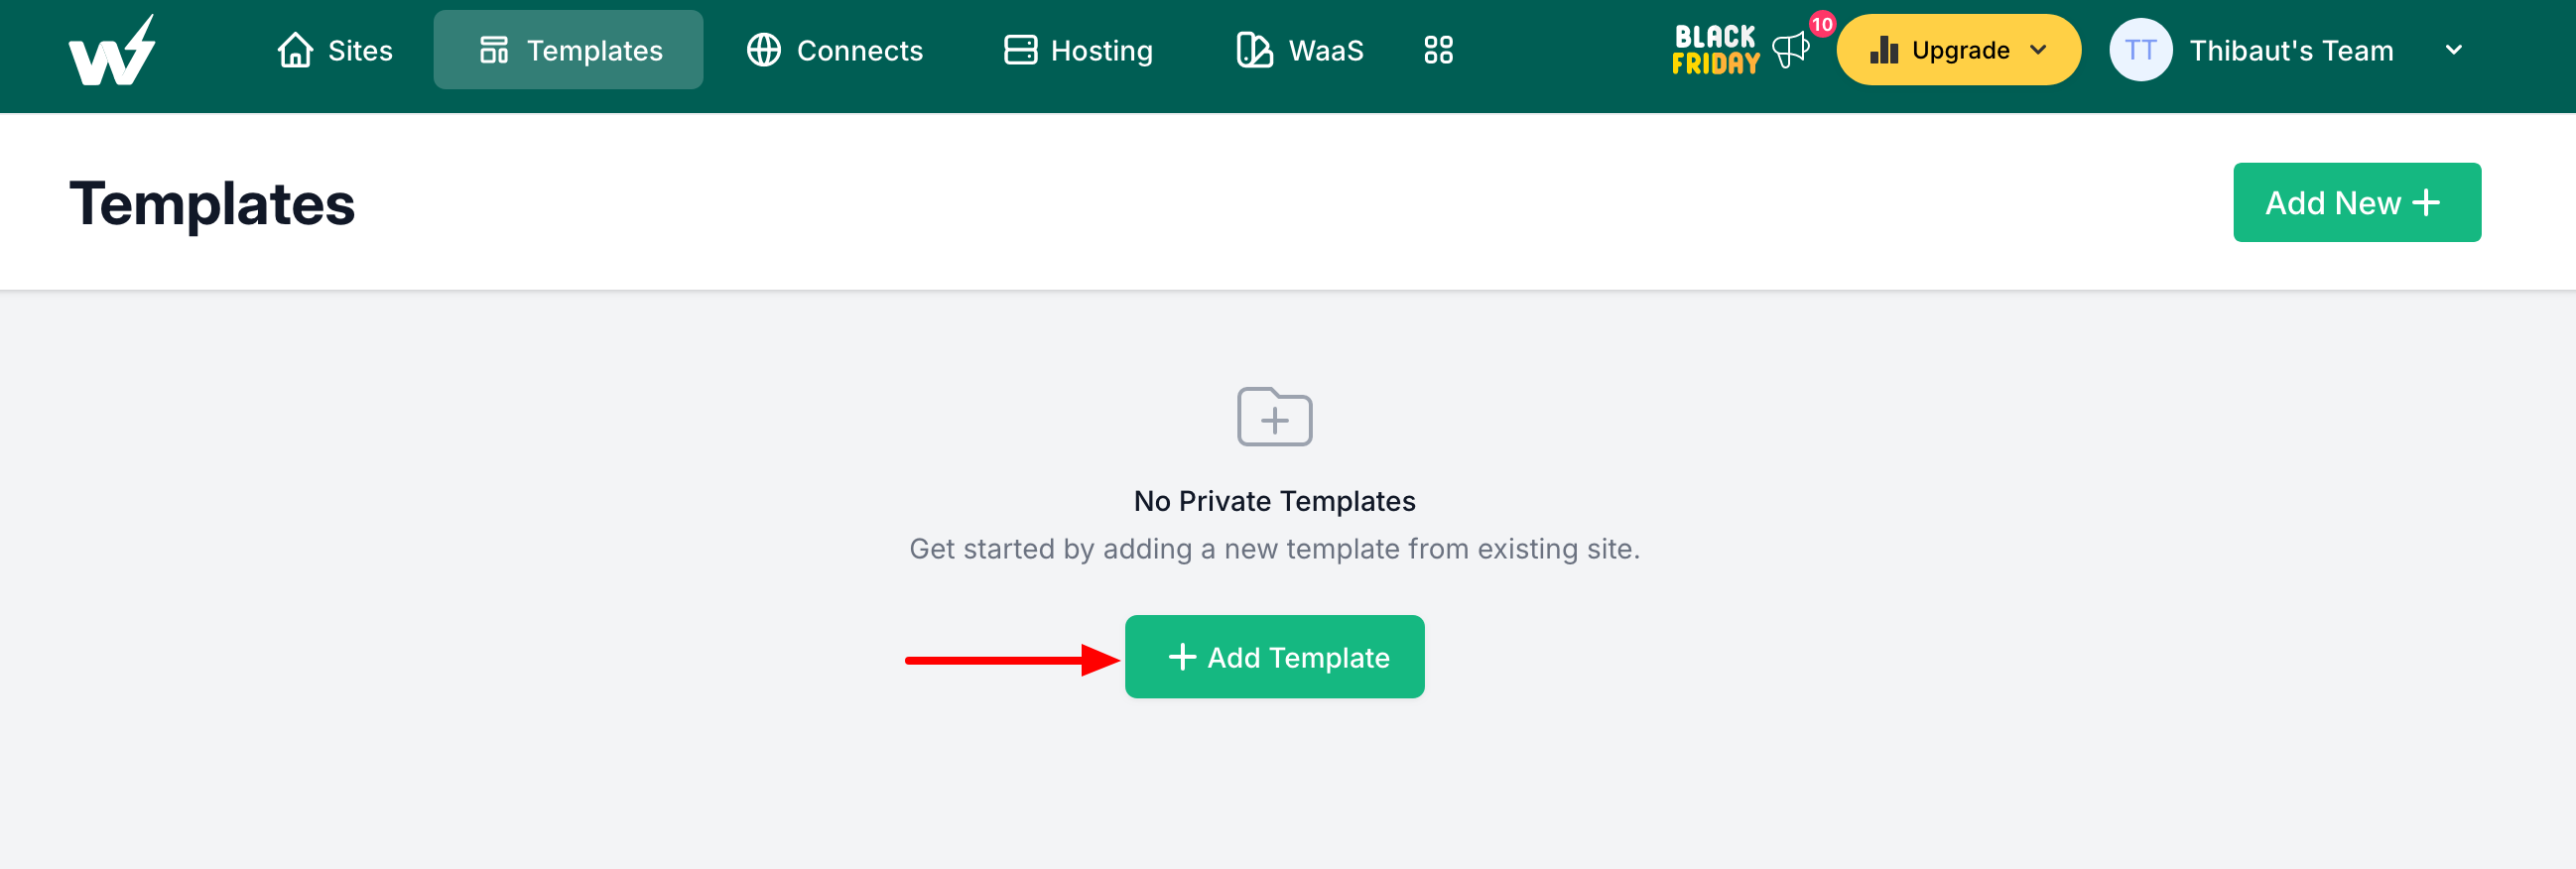 You can add a new template in the "Templates" tab in InstaWP.